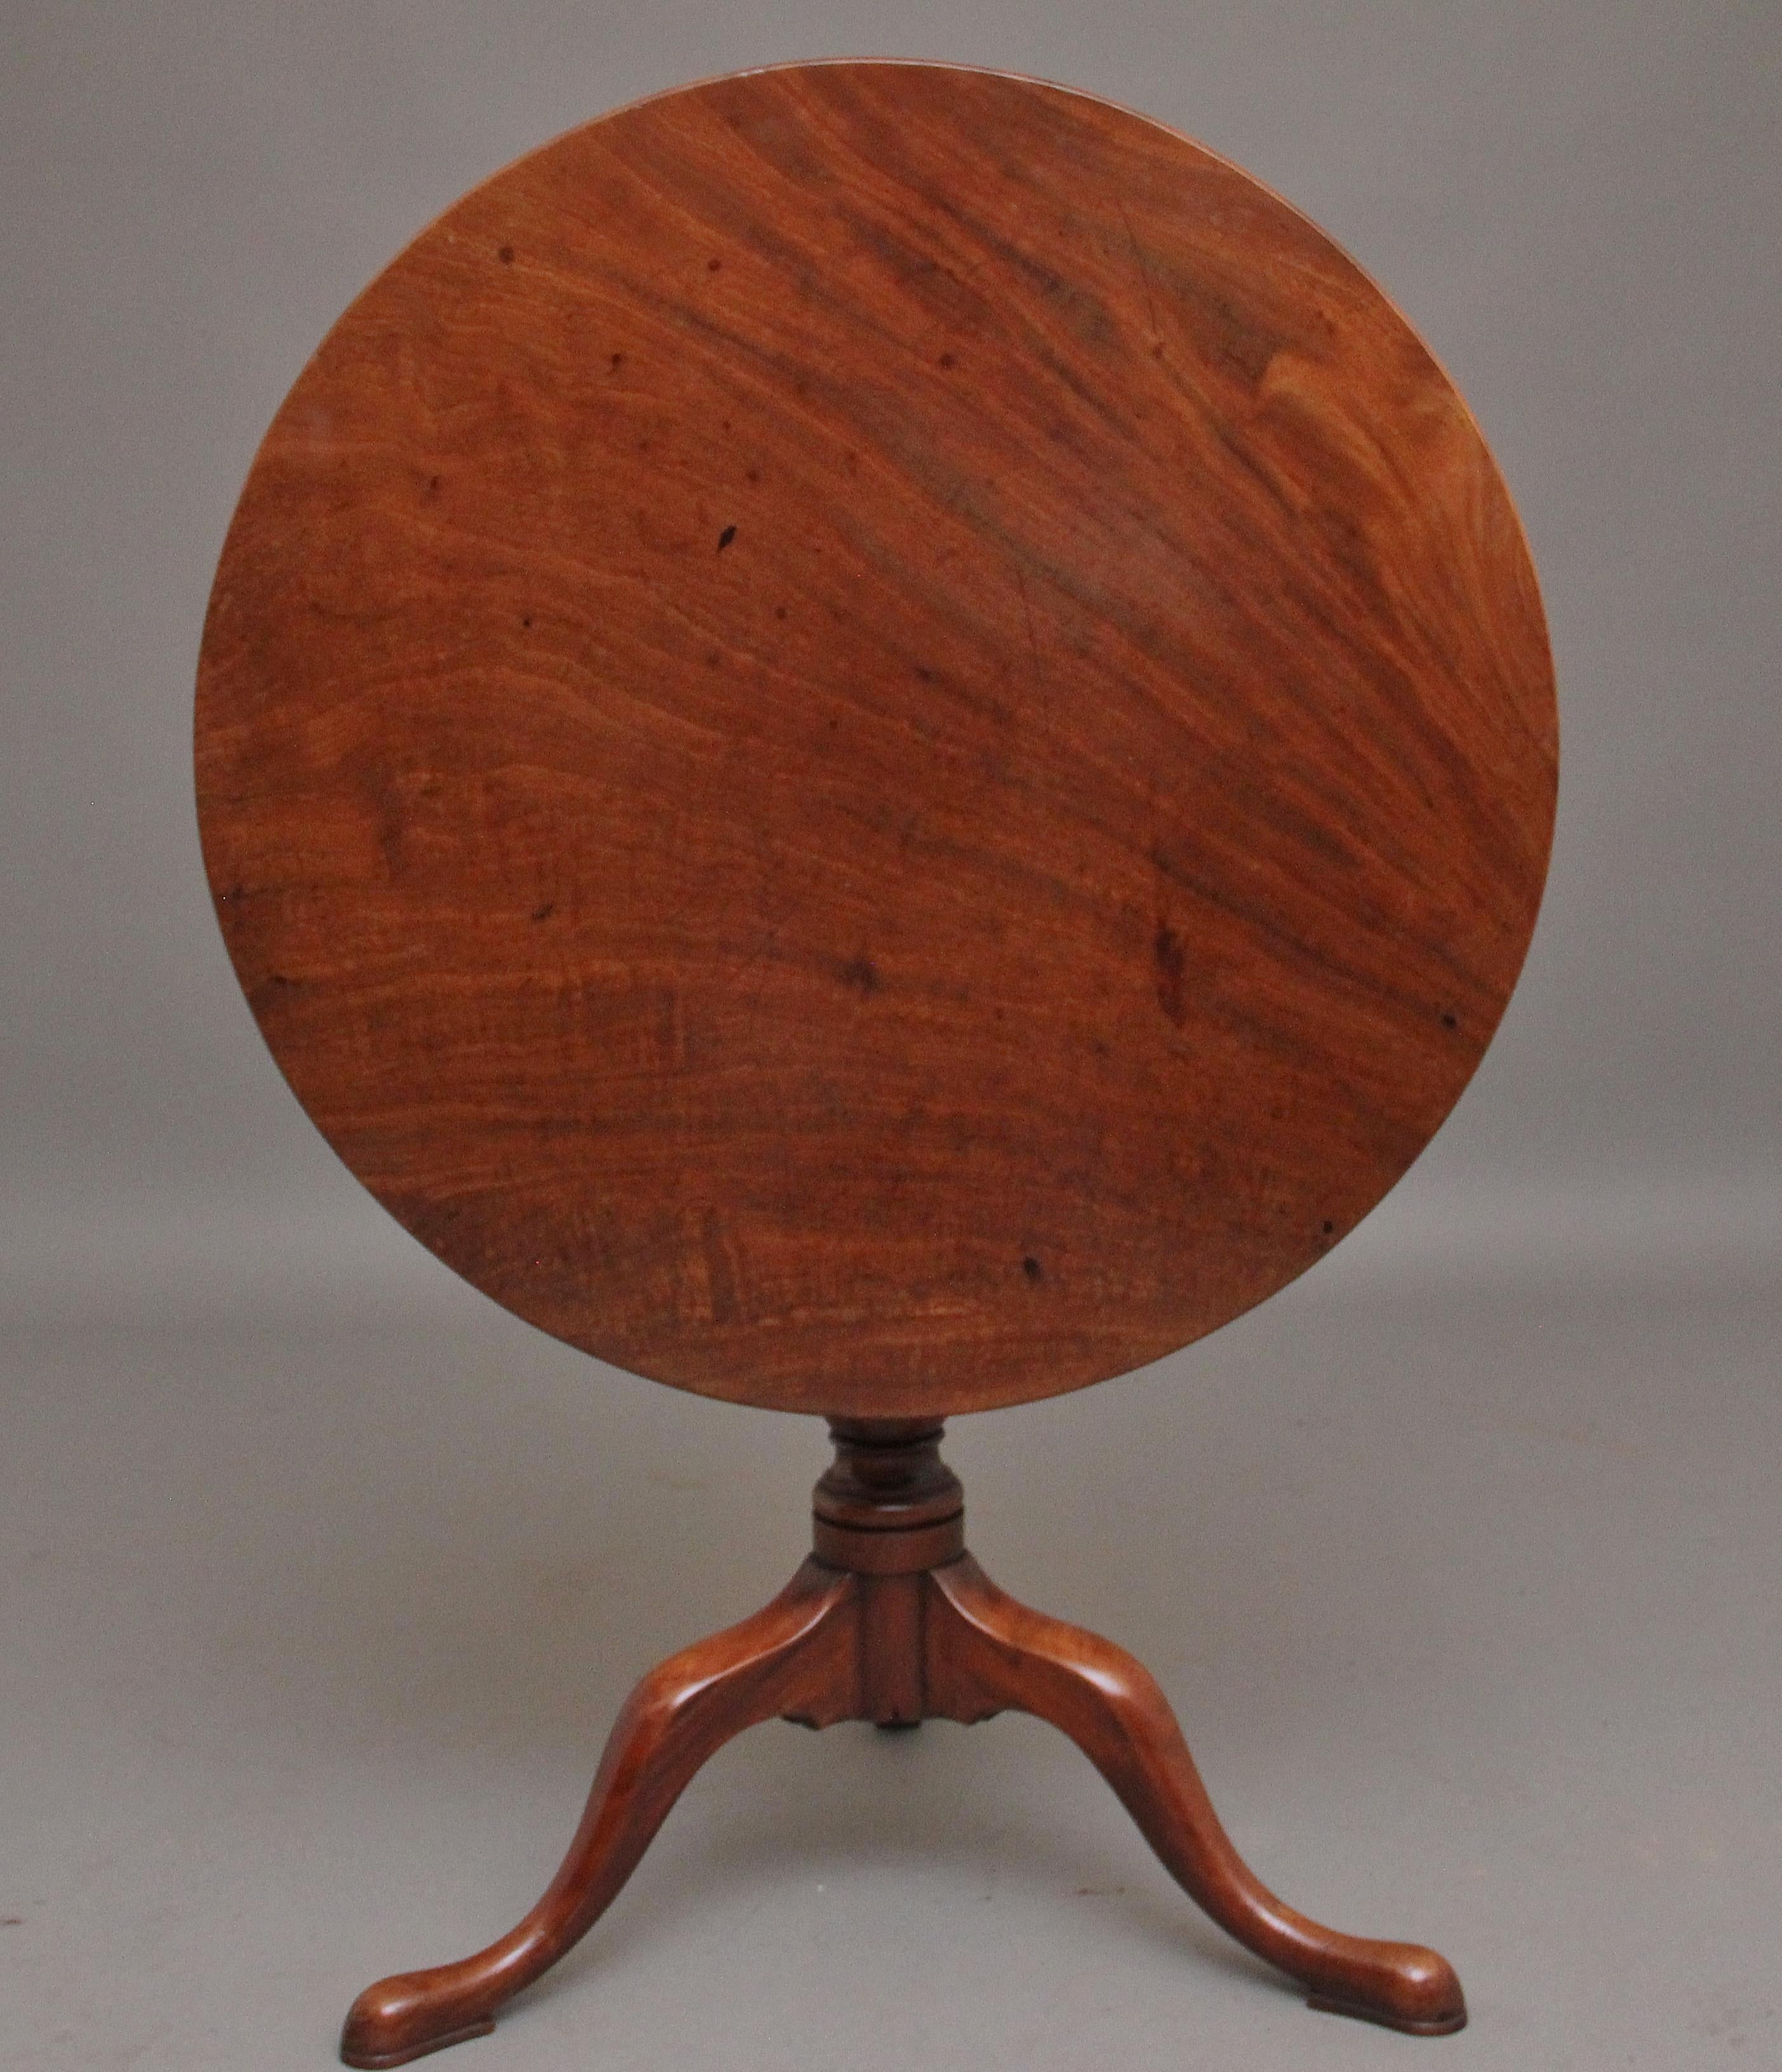 A superb 18th century mahogany tripod table, having a wonderful figured circular top supported on a turned column terminating with three slender shaped legs. Lovely colour and in excellent condition, circa 1780.